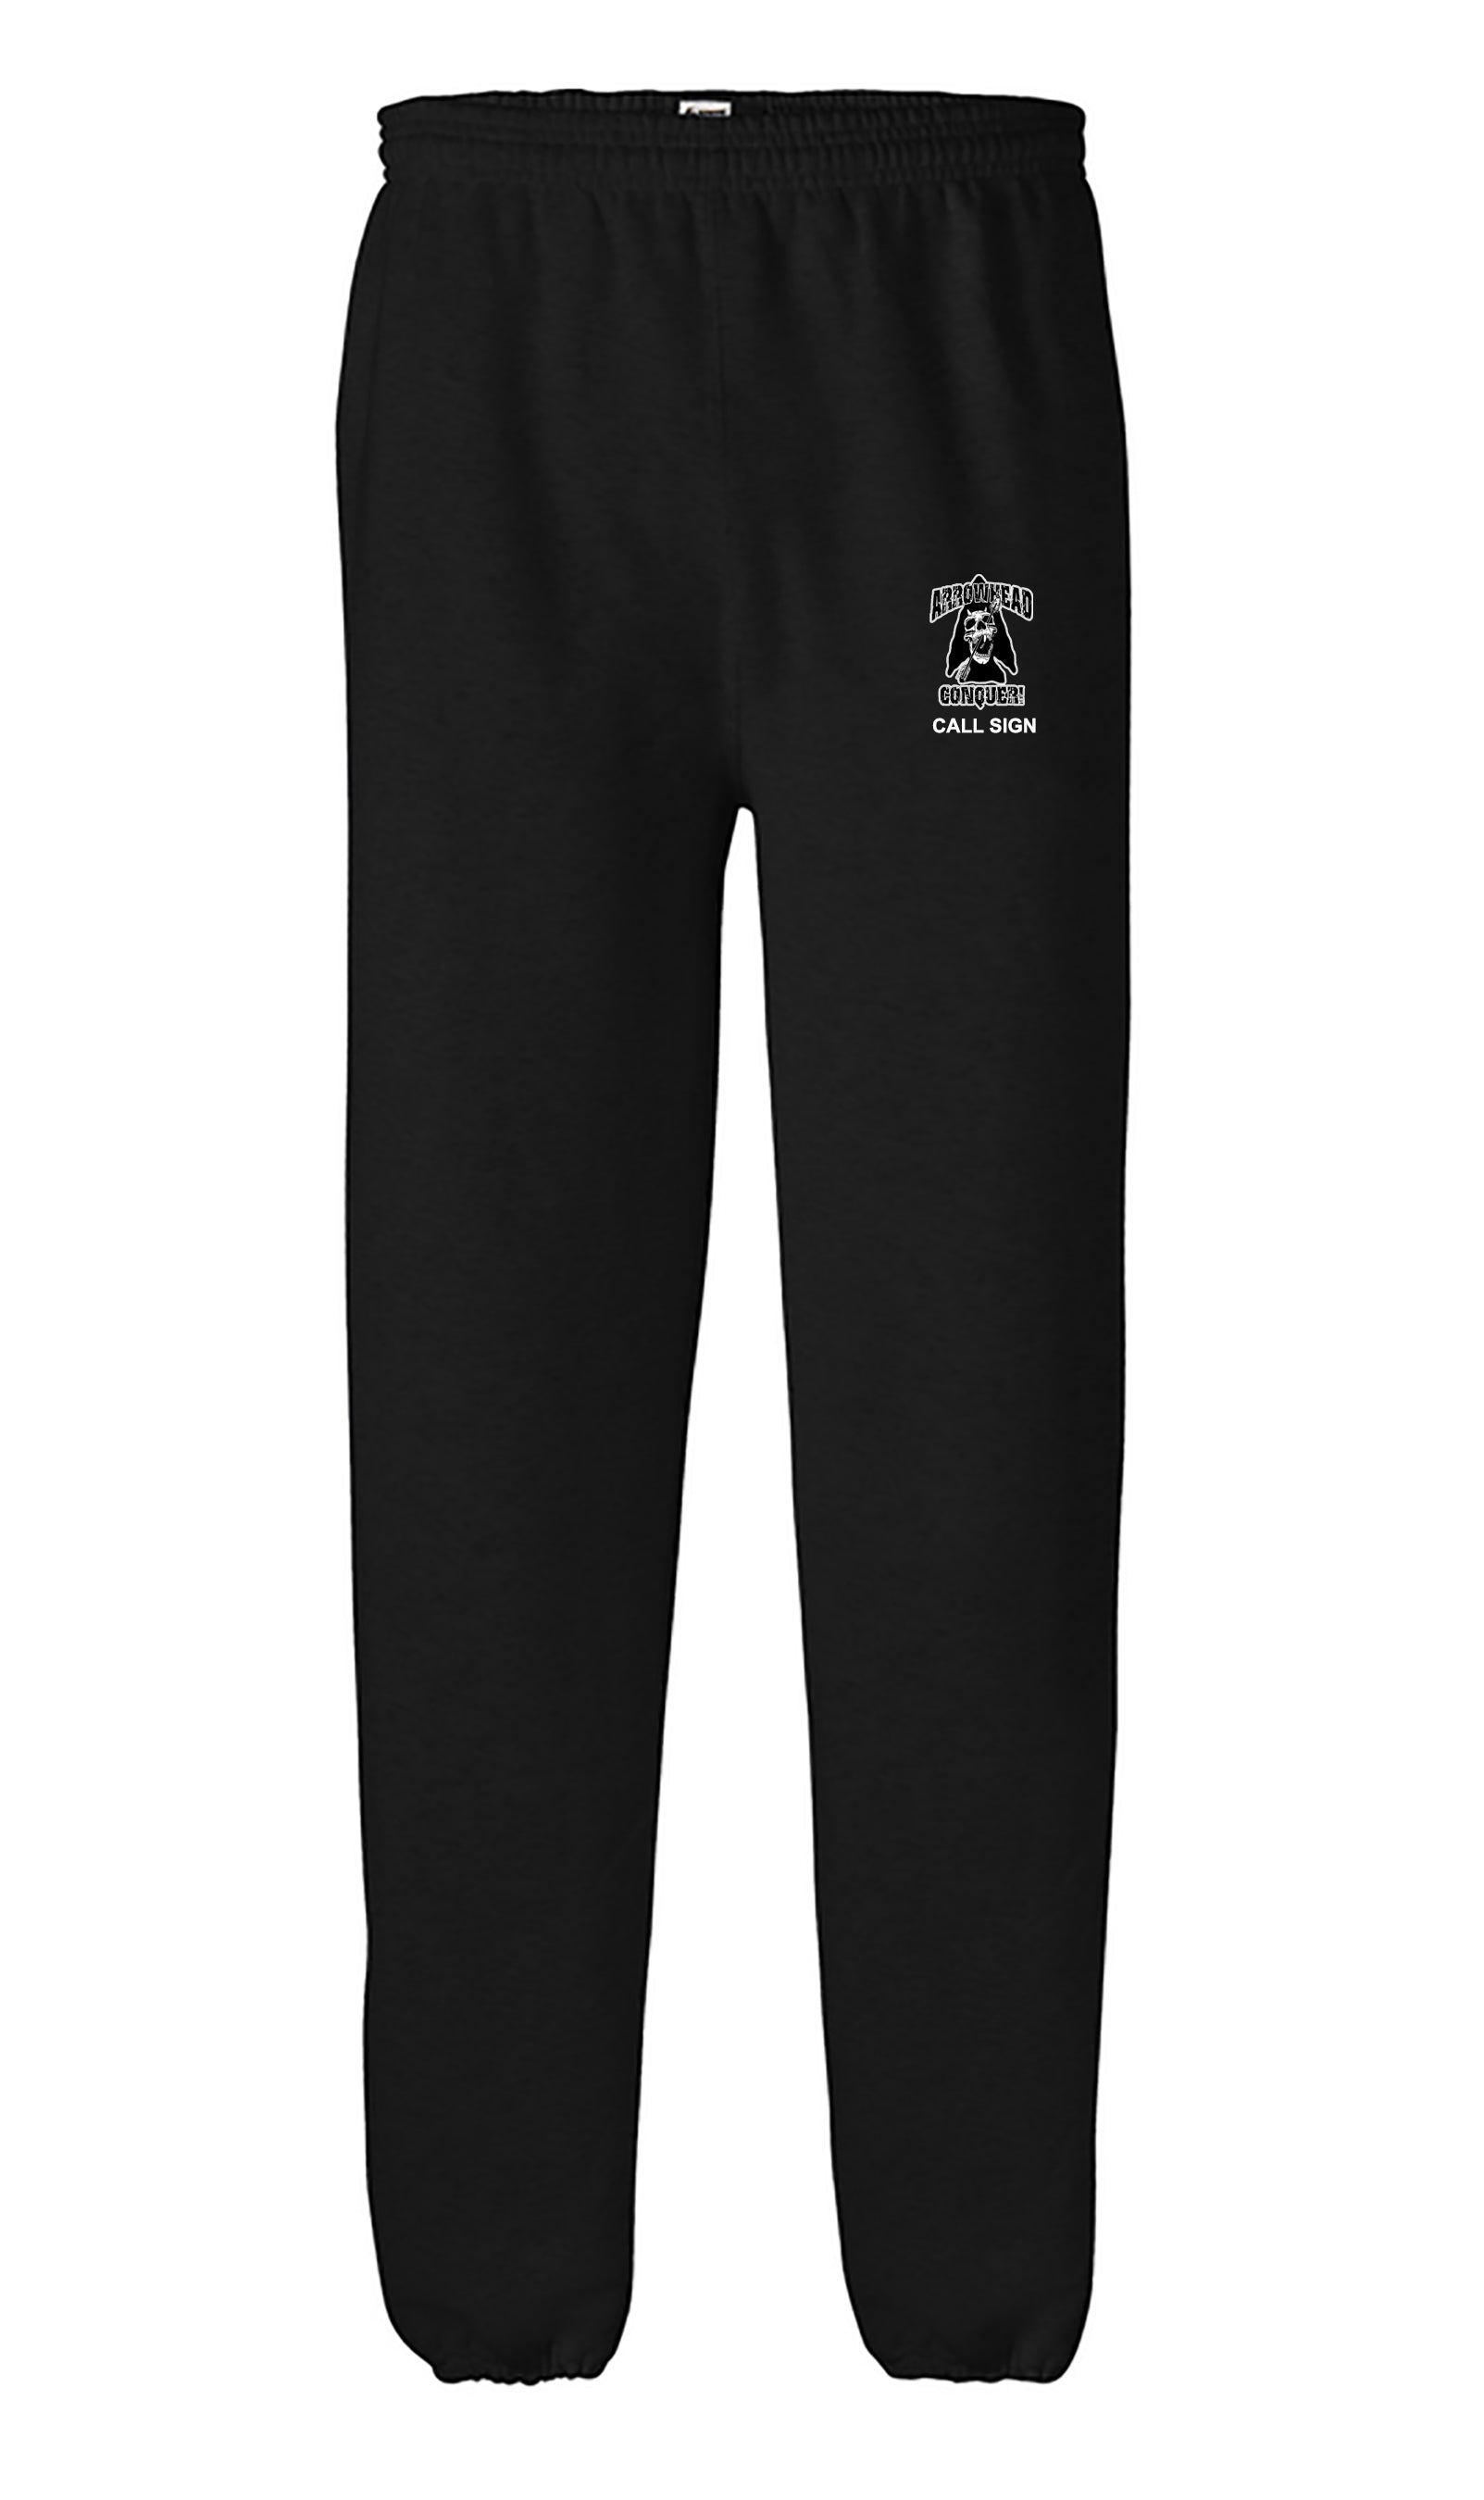 A Co Unisex Sweatpants. These Sweatpants are NOT Approved for PT. - S / Add  Custom Call Sign